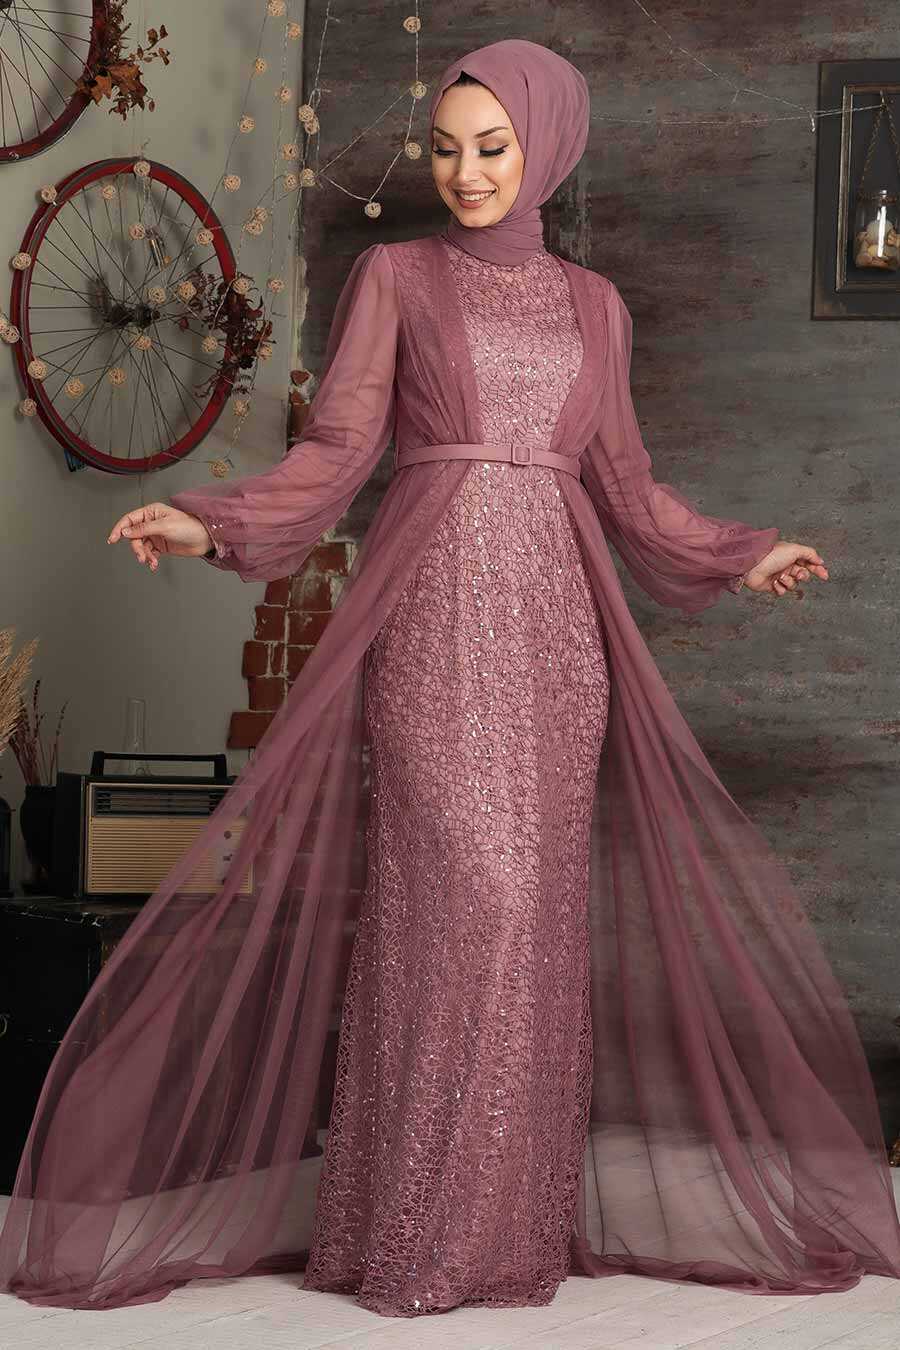 Neva Style - Luxorious Dusty Rose Islamic Evening Gown 5383GK